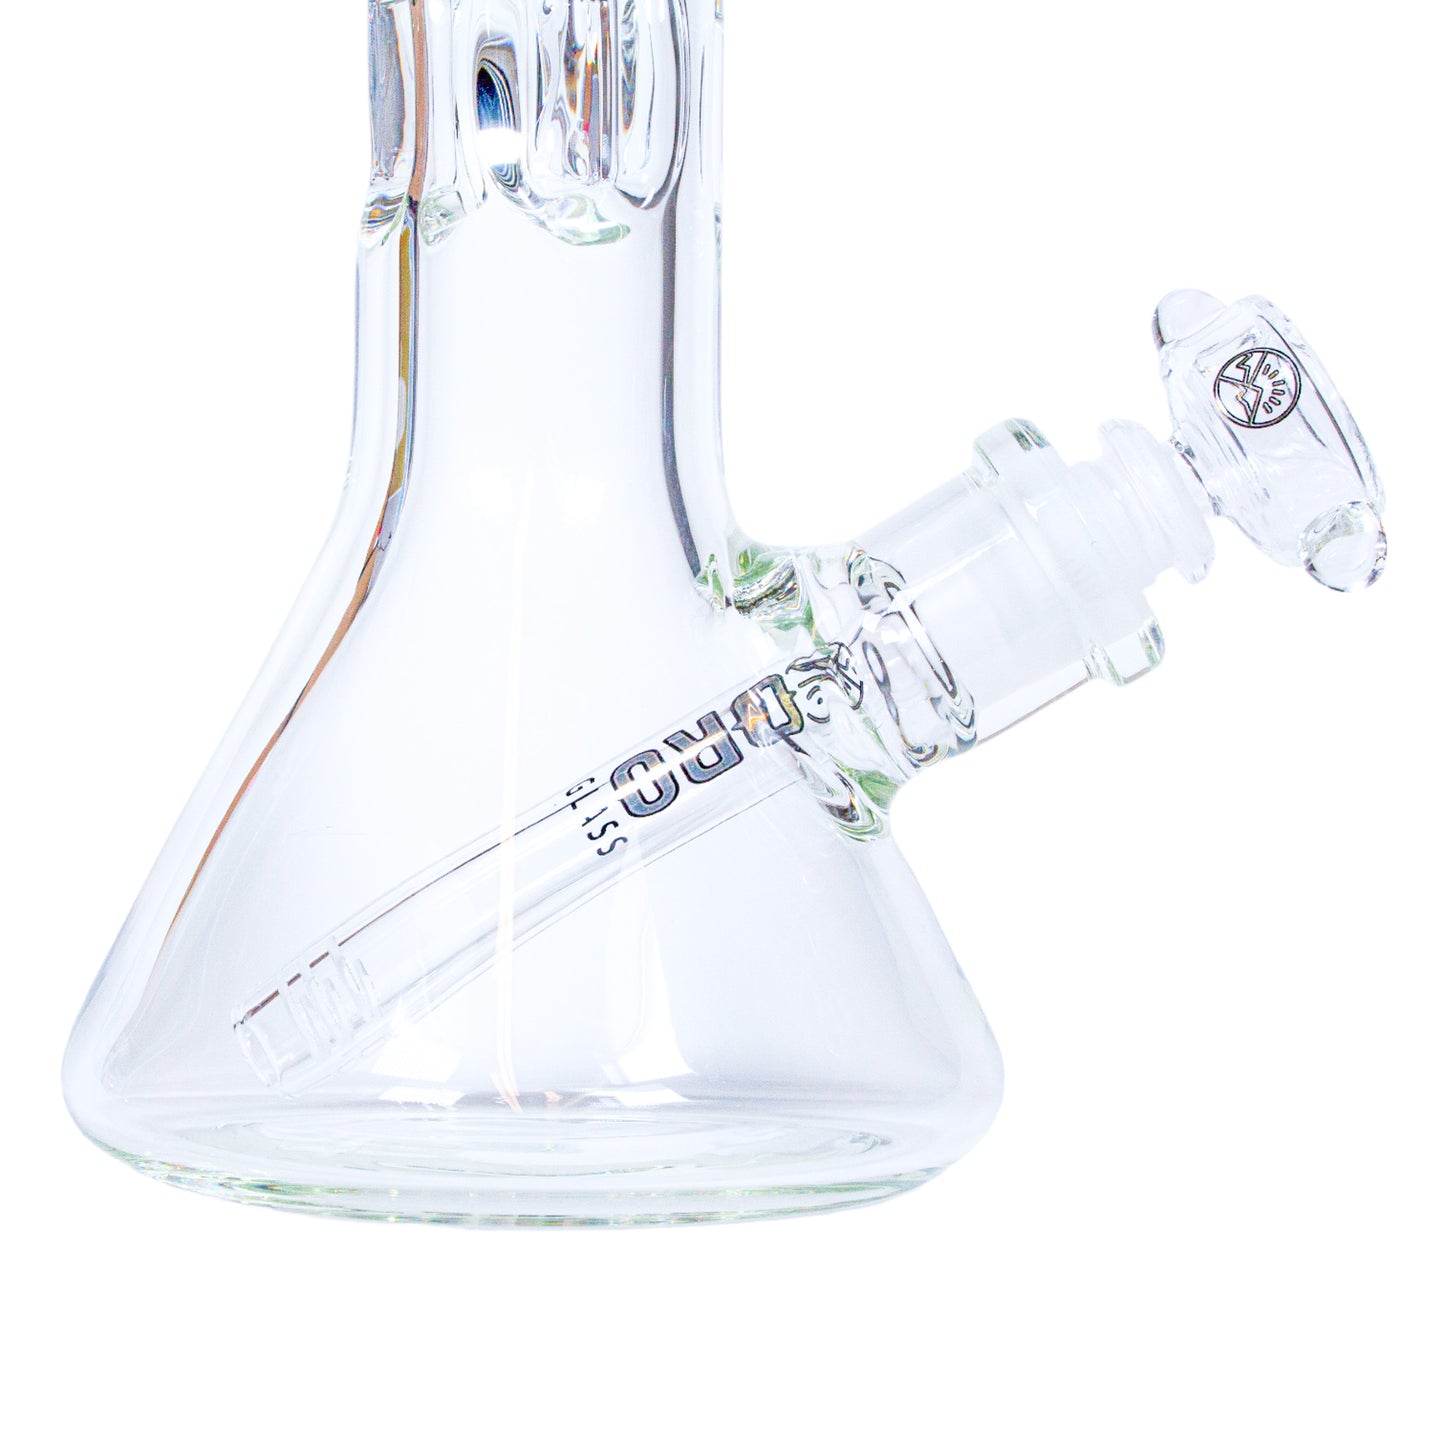 An Oro Glass Company 18mm to 14mm Diffused Downstem inside an Oro Glass Company Thick Beaker Water Pipe.